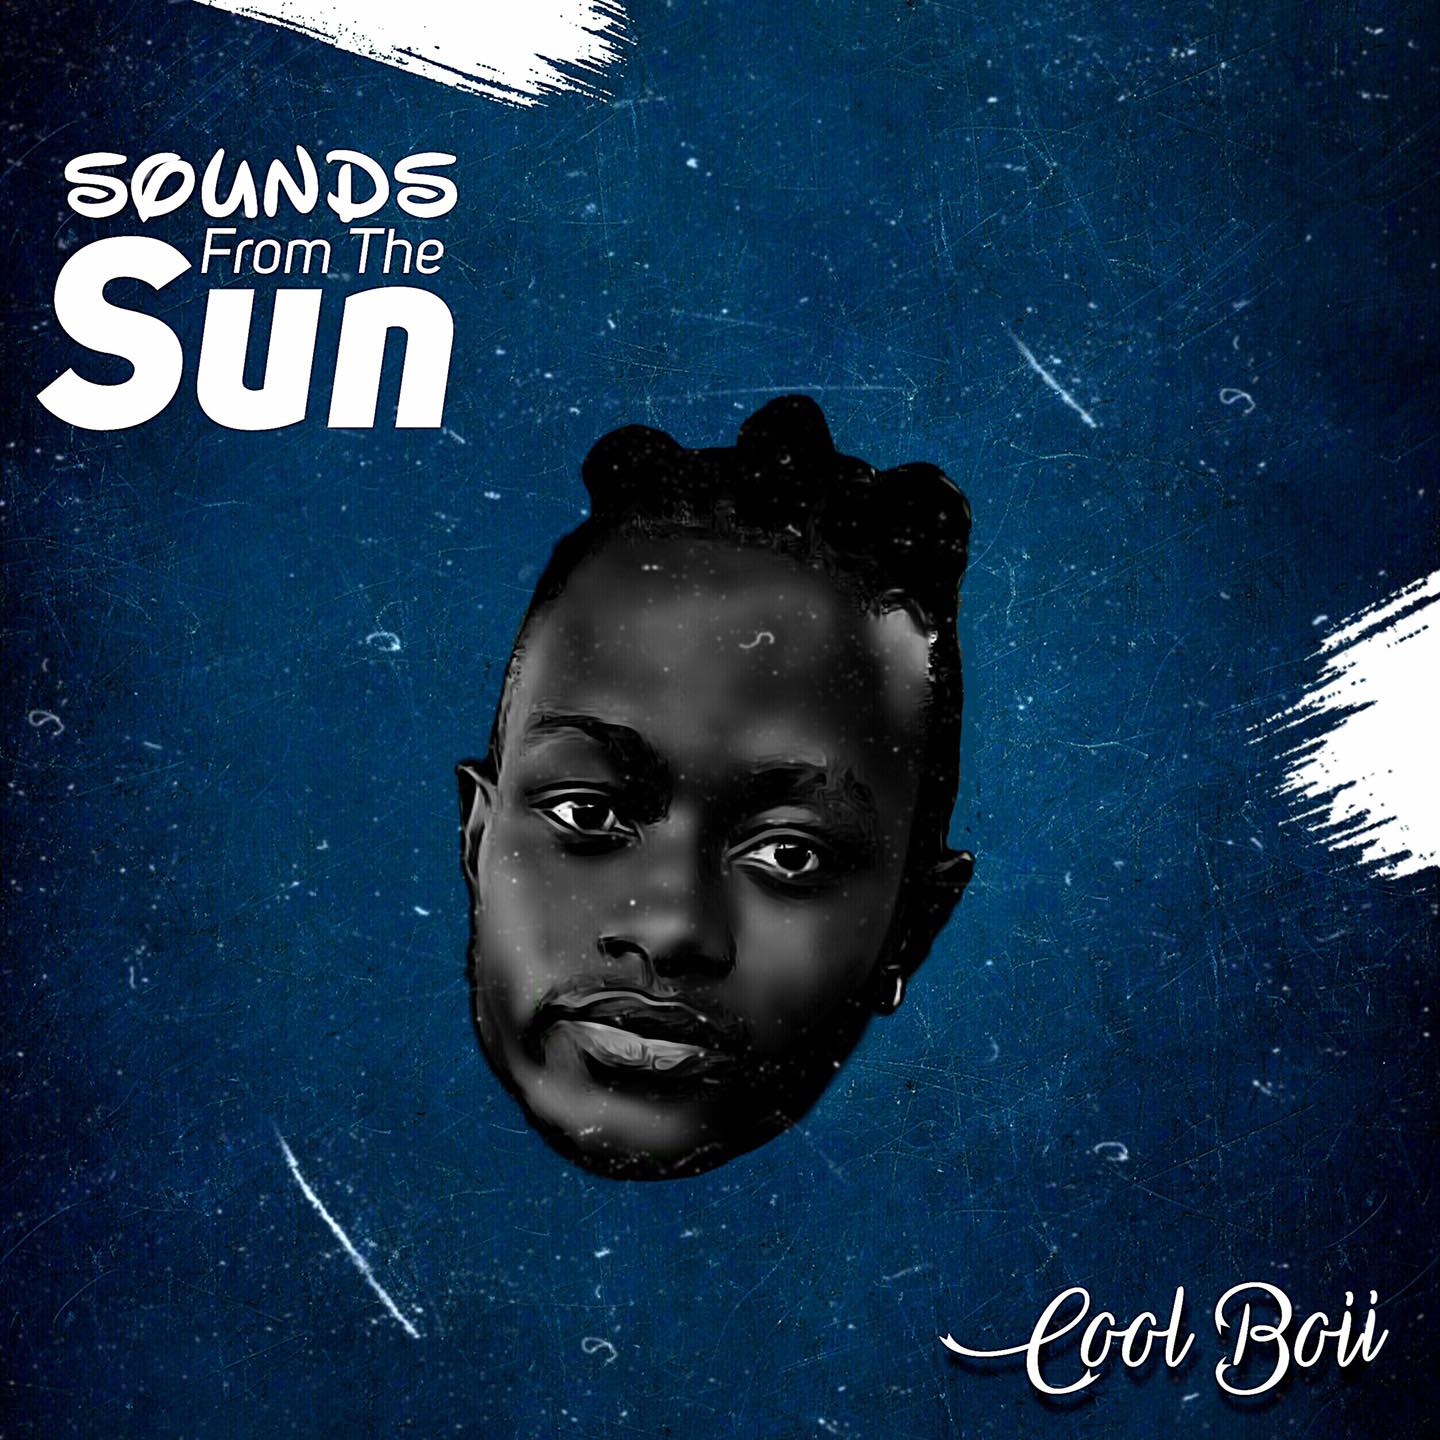 Cool Boii - sounds from the sun